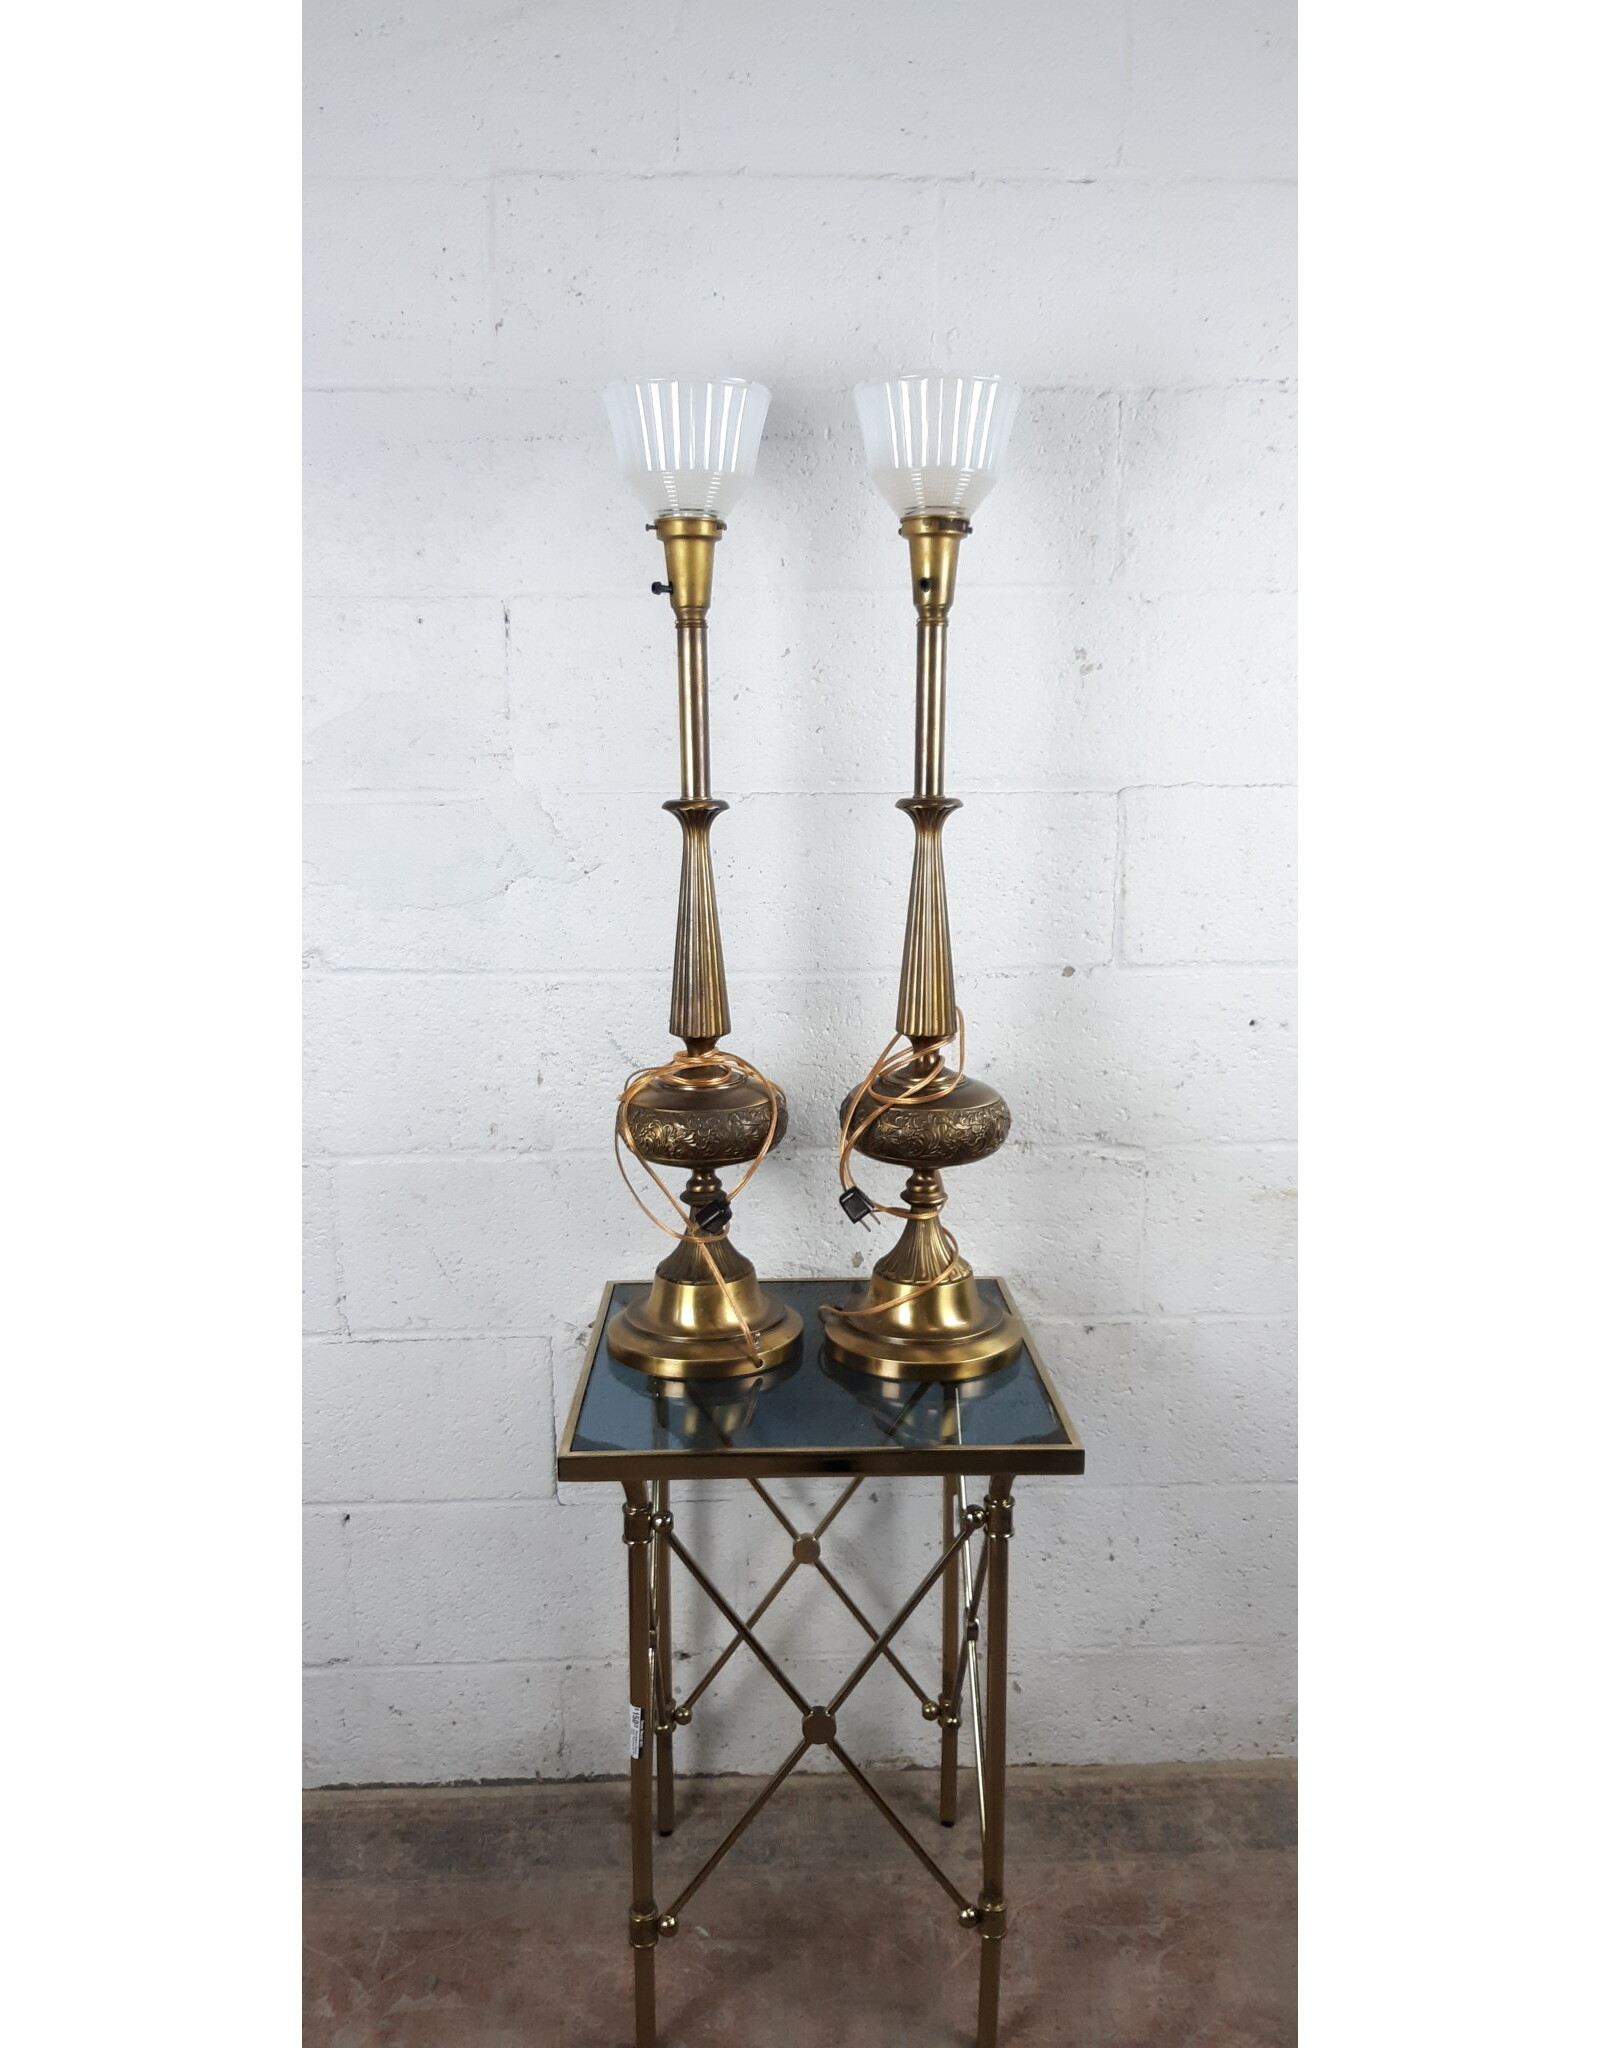 Vintage 1950"s Brushed Brass Style Table Lamp ($150 for pair)